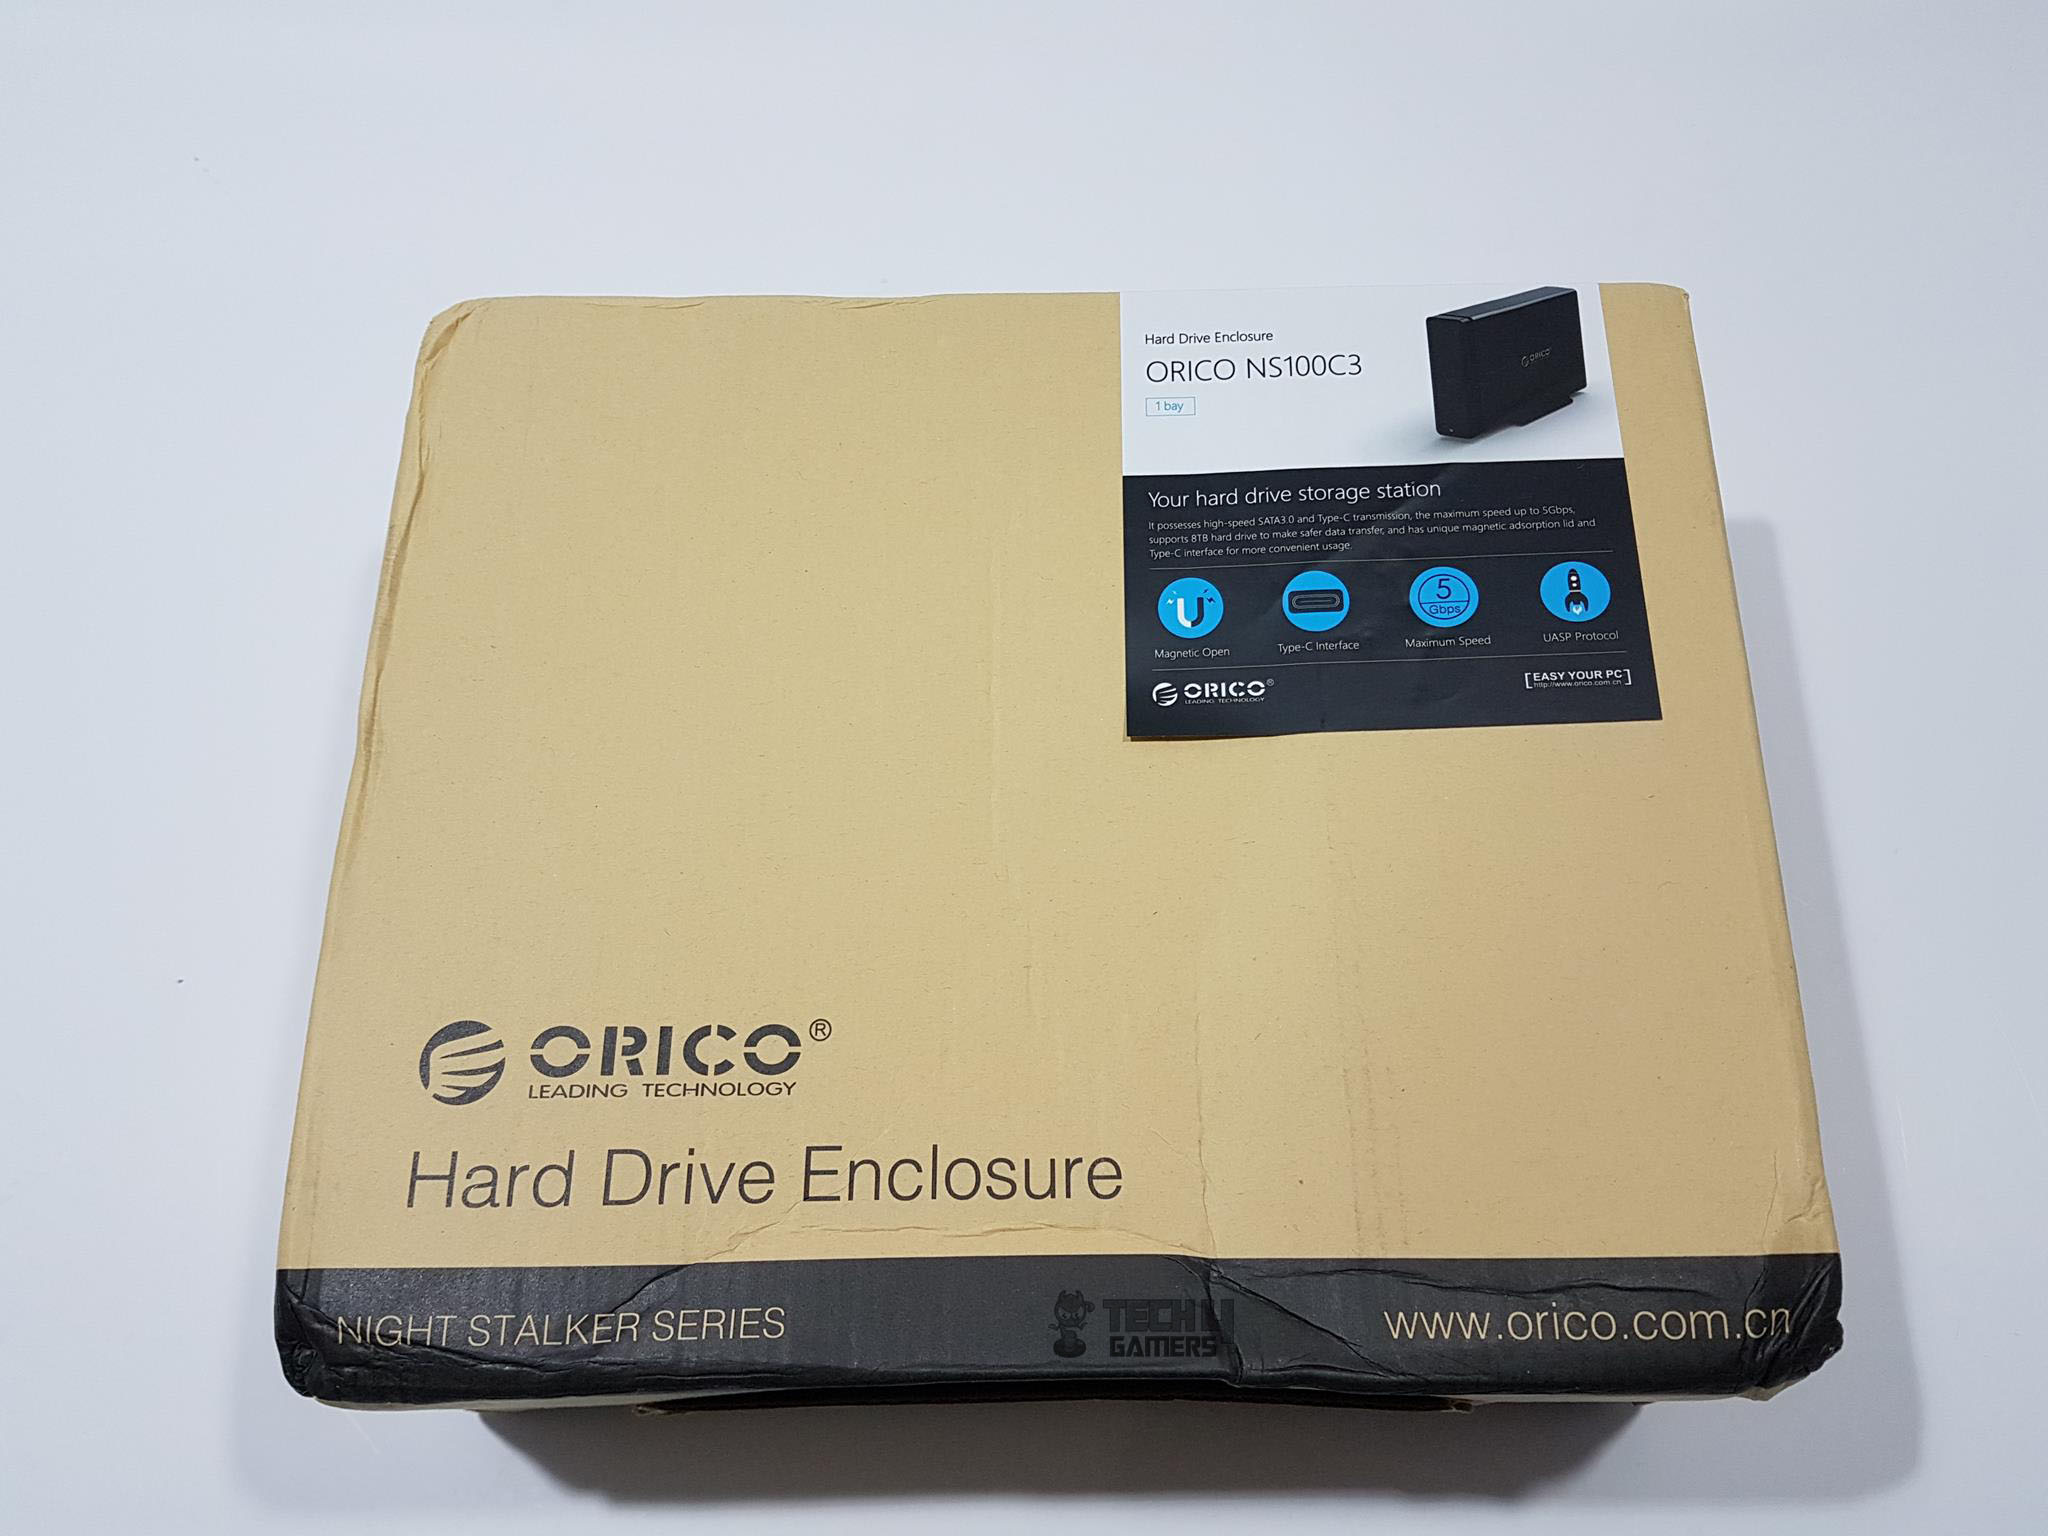 Hard Drive Packaging and Unboxing